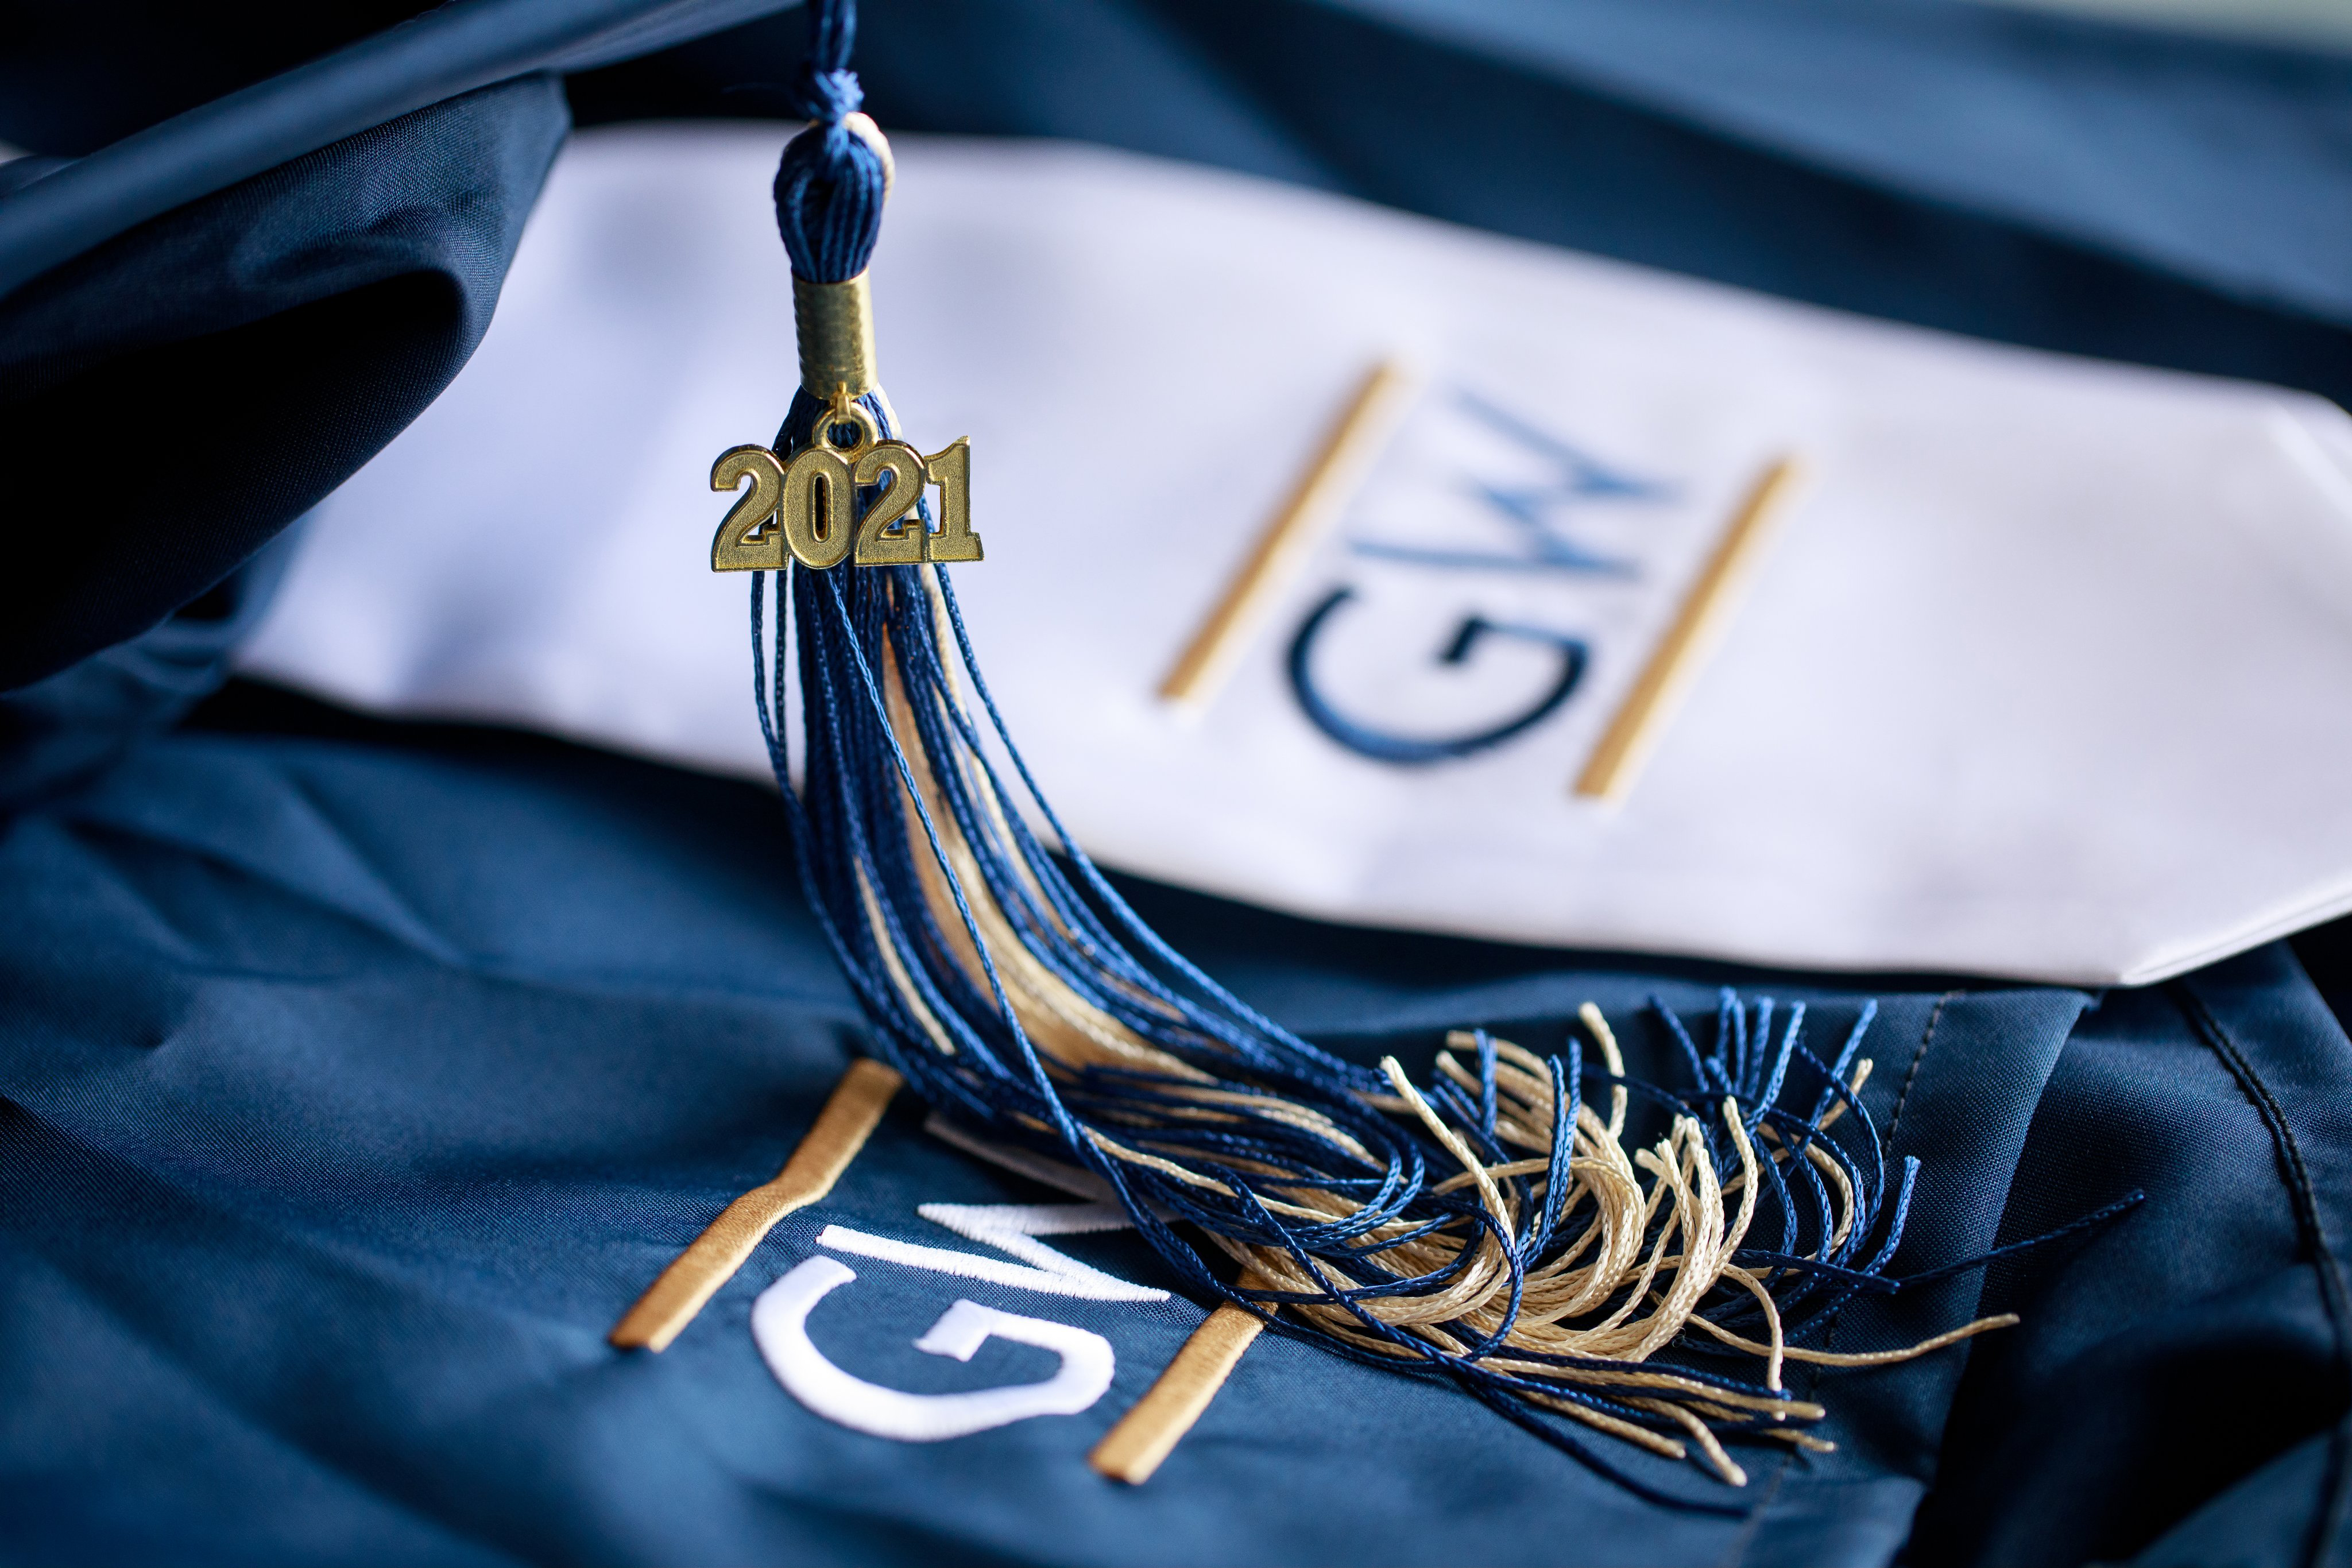 GW logo with embroidered blue, buff material and 2021 tassle